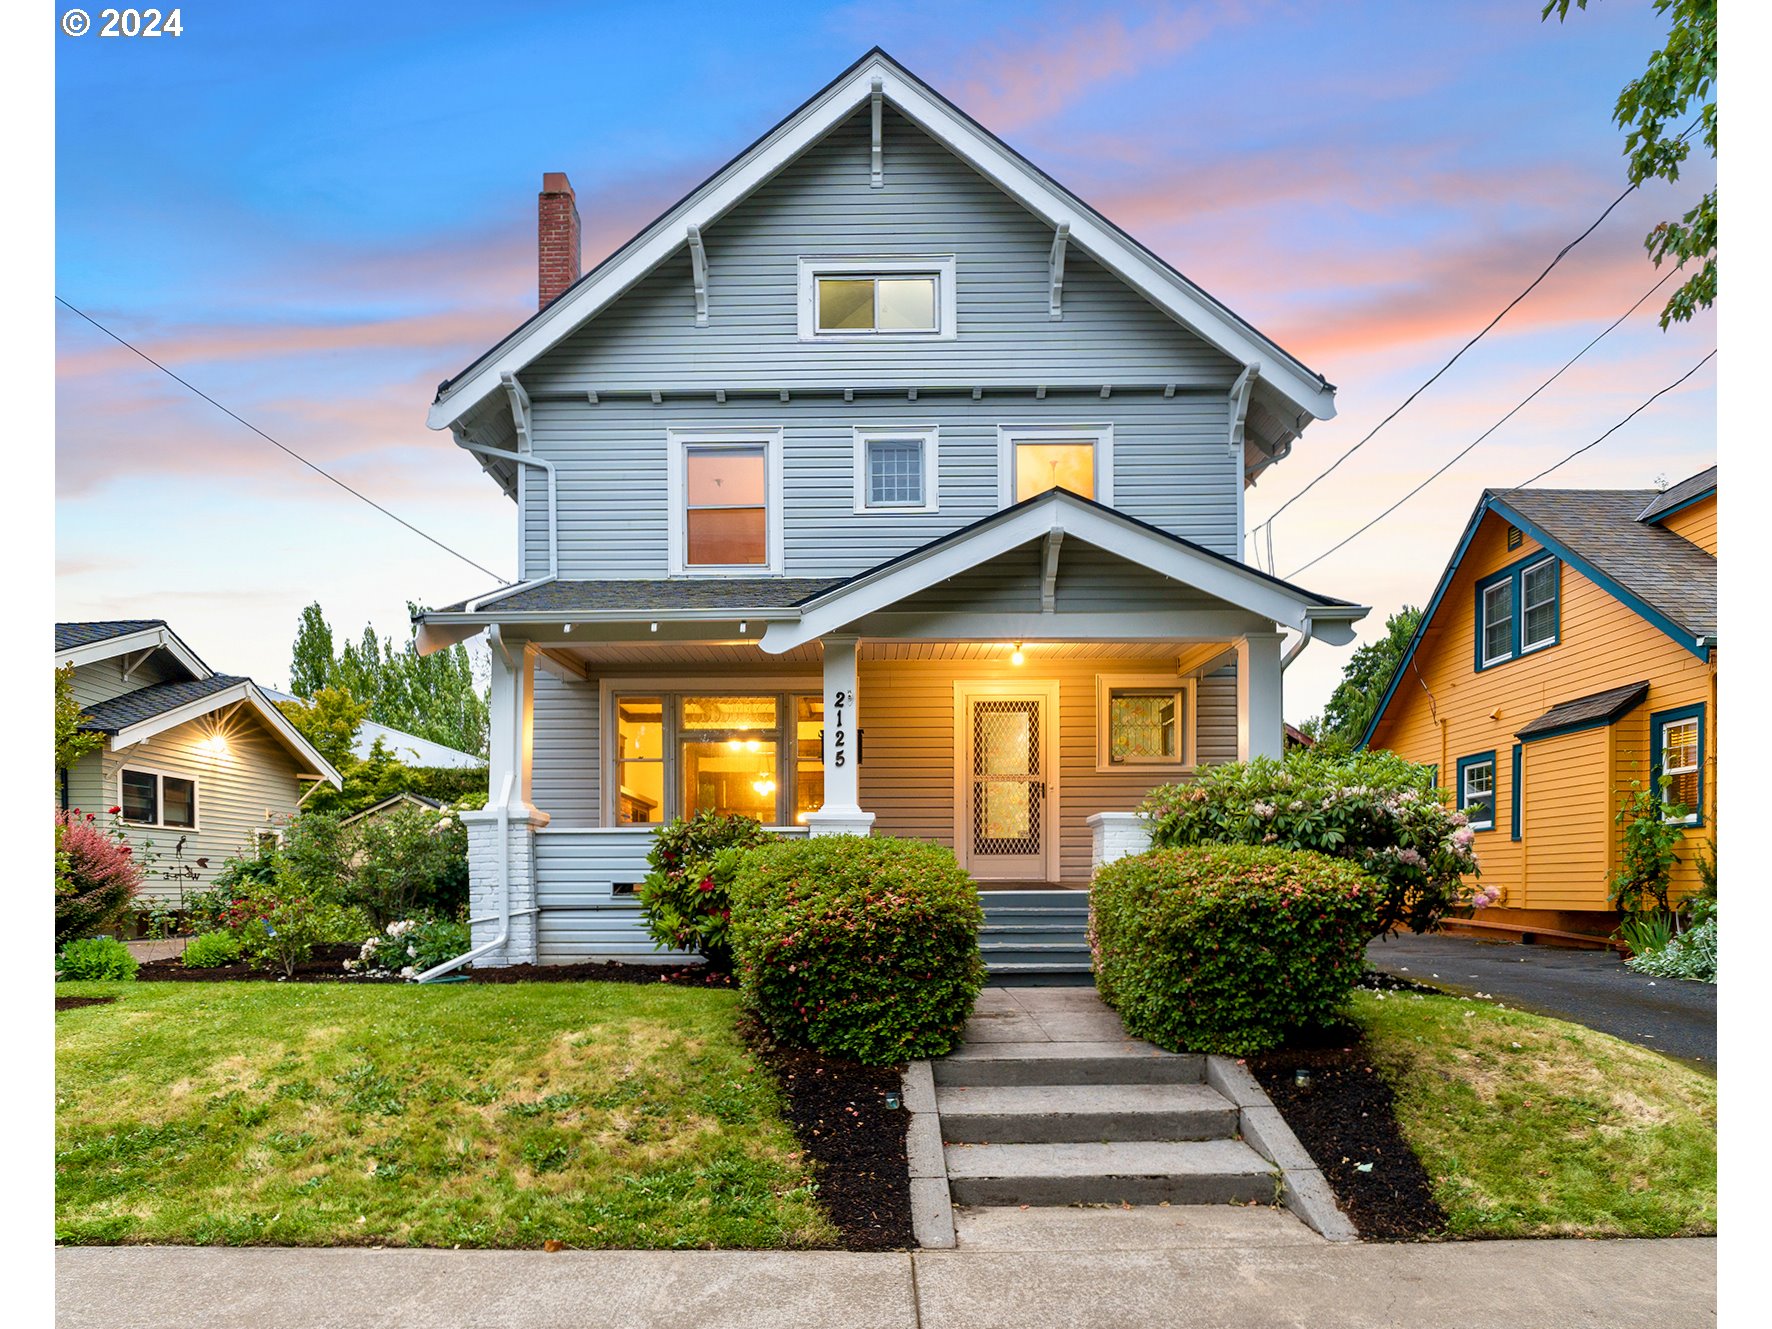 Huge price reduction! First time on the market in over 50 years! This 5 bed/3 bath 1913 palatial Craftsman home is full of original details including unpainted woodwork throughout (box beam ceilings, doors and trim, parlor doors, built-in buffet with leaded glass...). A true diamond in the rough! All that's missing is your love, attention, and imagination to restore this cosmetic fixer to its original glory. Fantastic Hollywood location with easy access to everything you need. Walk score 91/bike score 96. Homes like this don't go on the market very often. Opportunity knocks?! Don't miss this one! **Open Sun 7/14 11am-1pm**